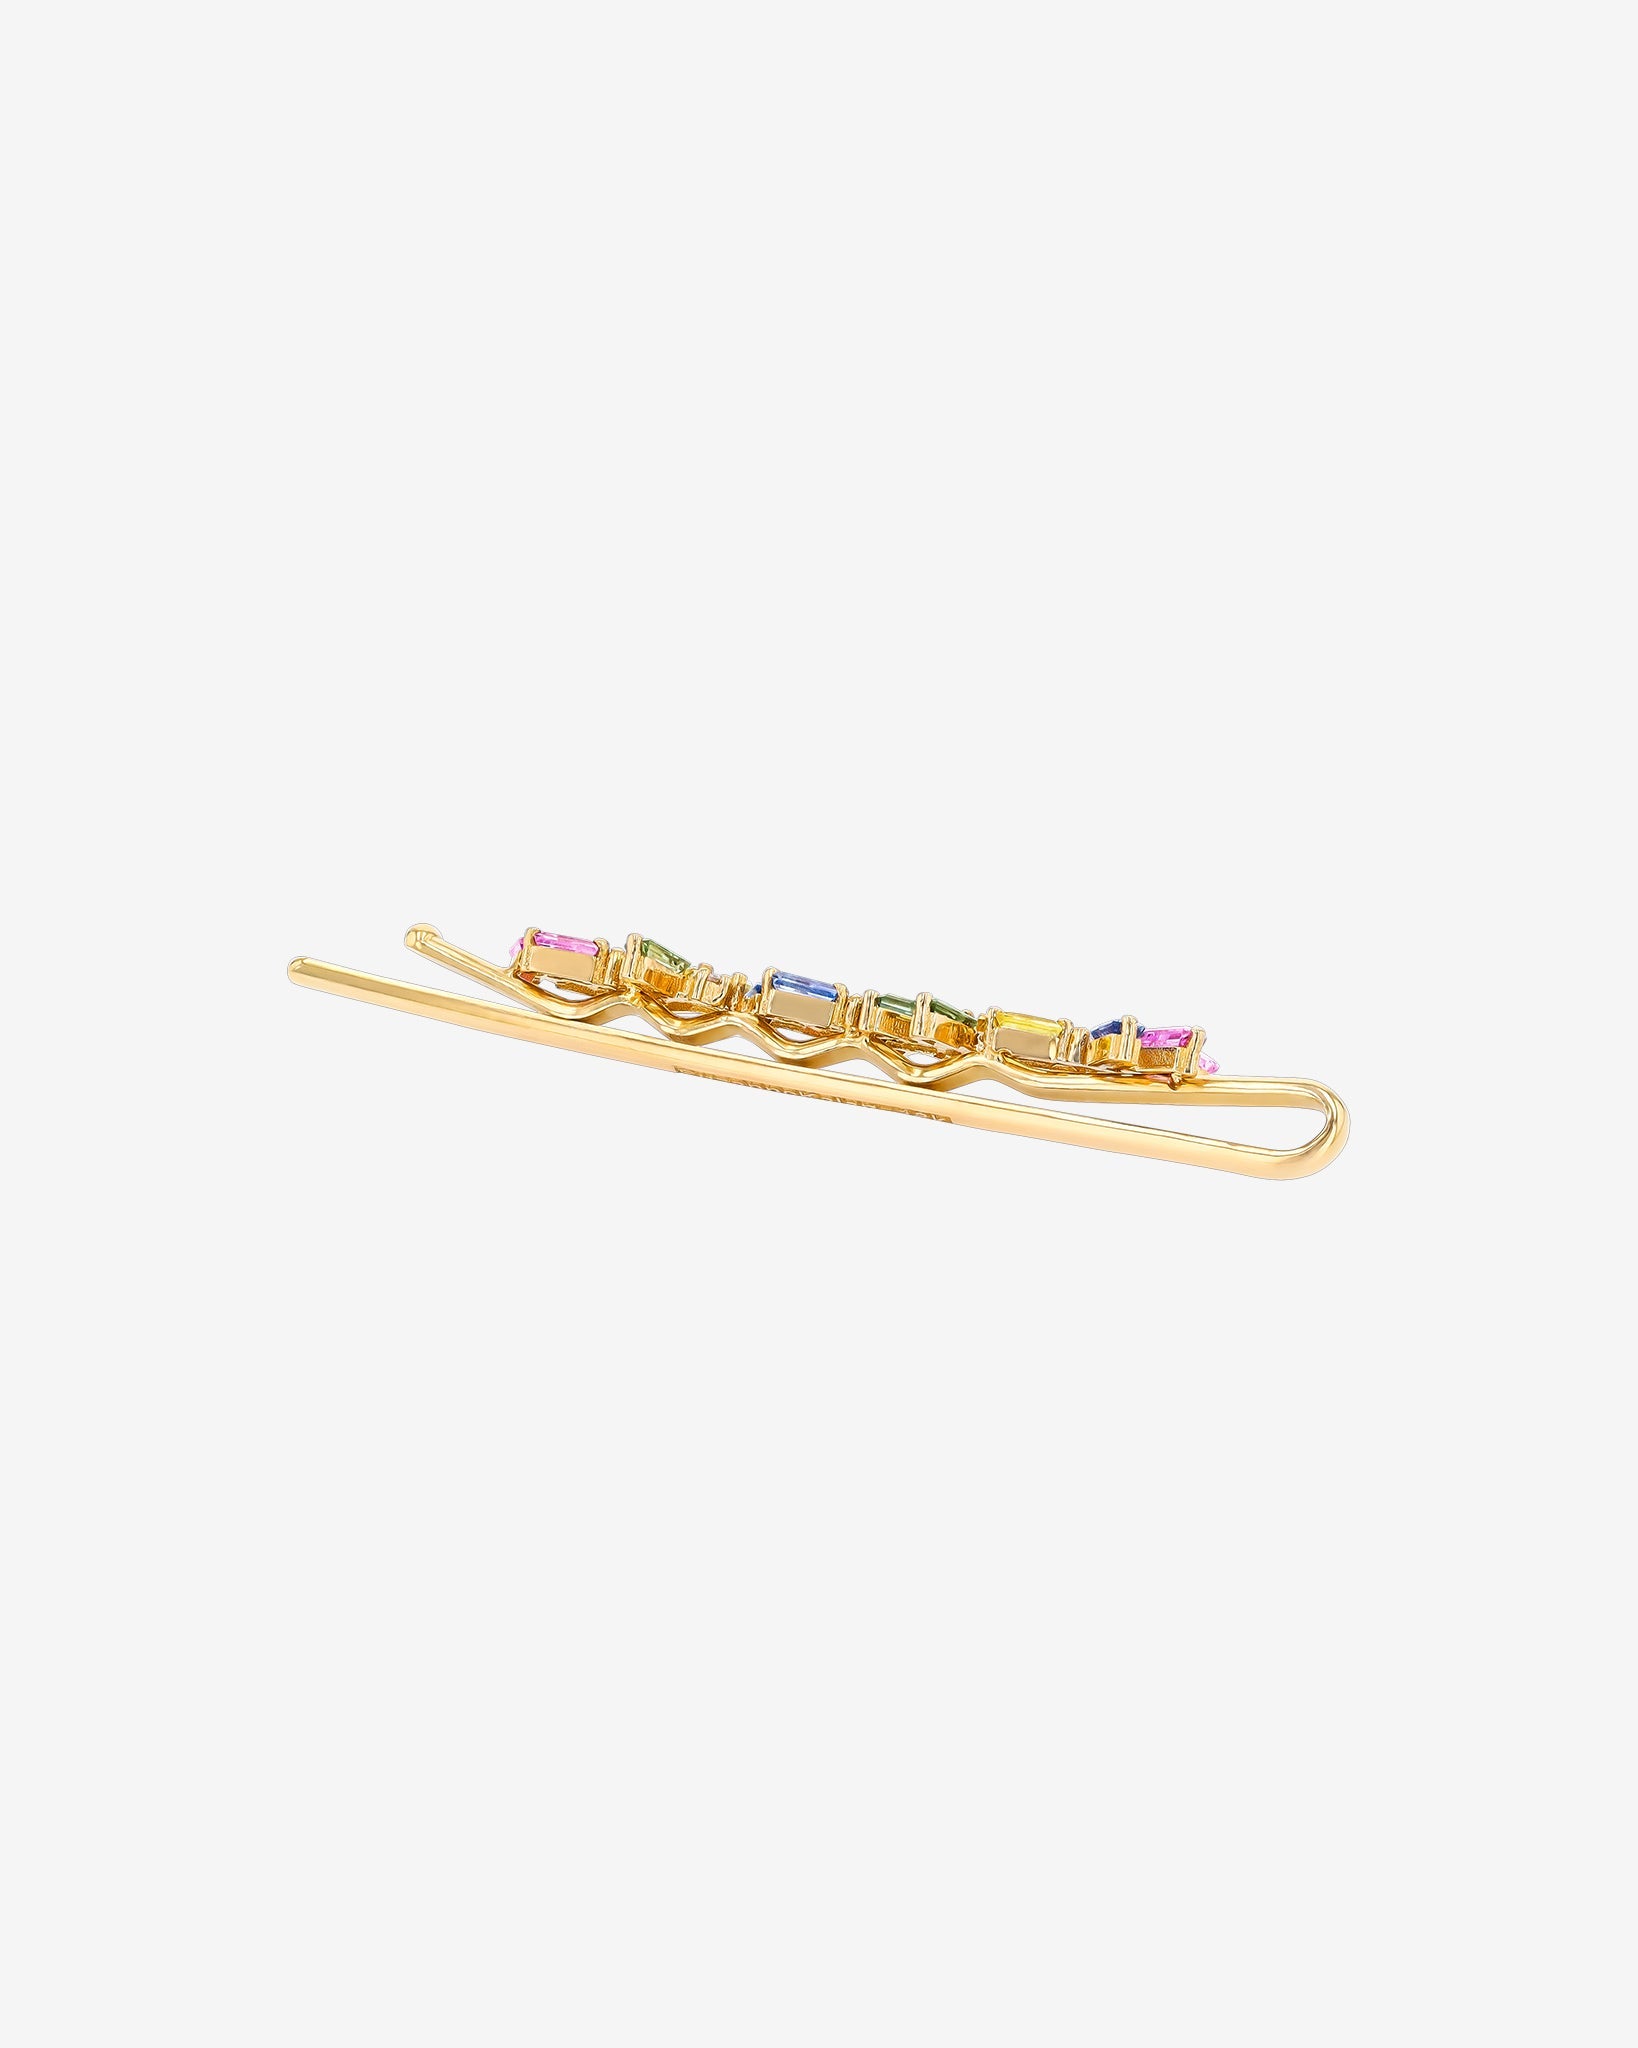 Suzanne Kalan Pastel Sapphire Frenzy Hairpin in 18k yellow gold